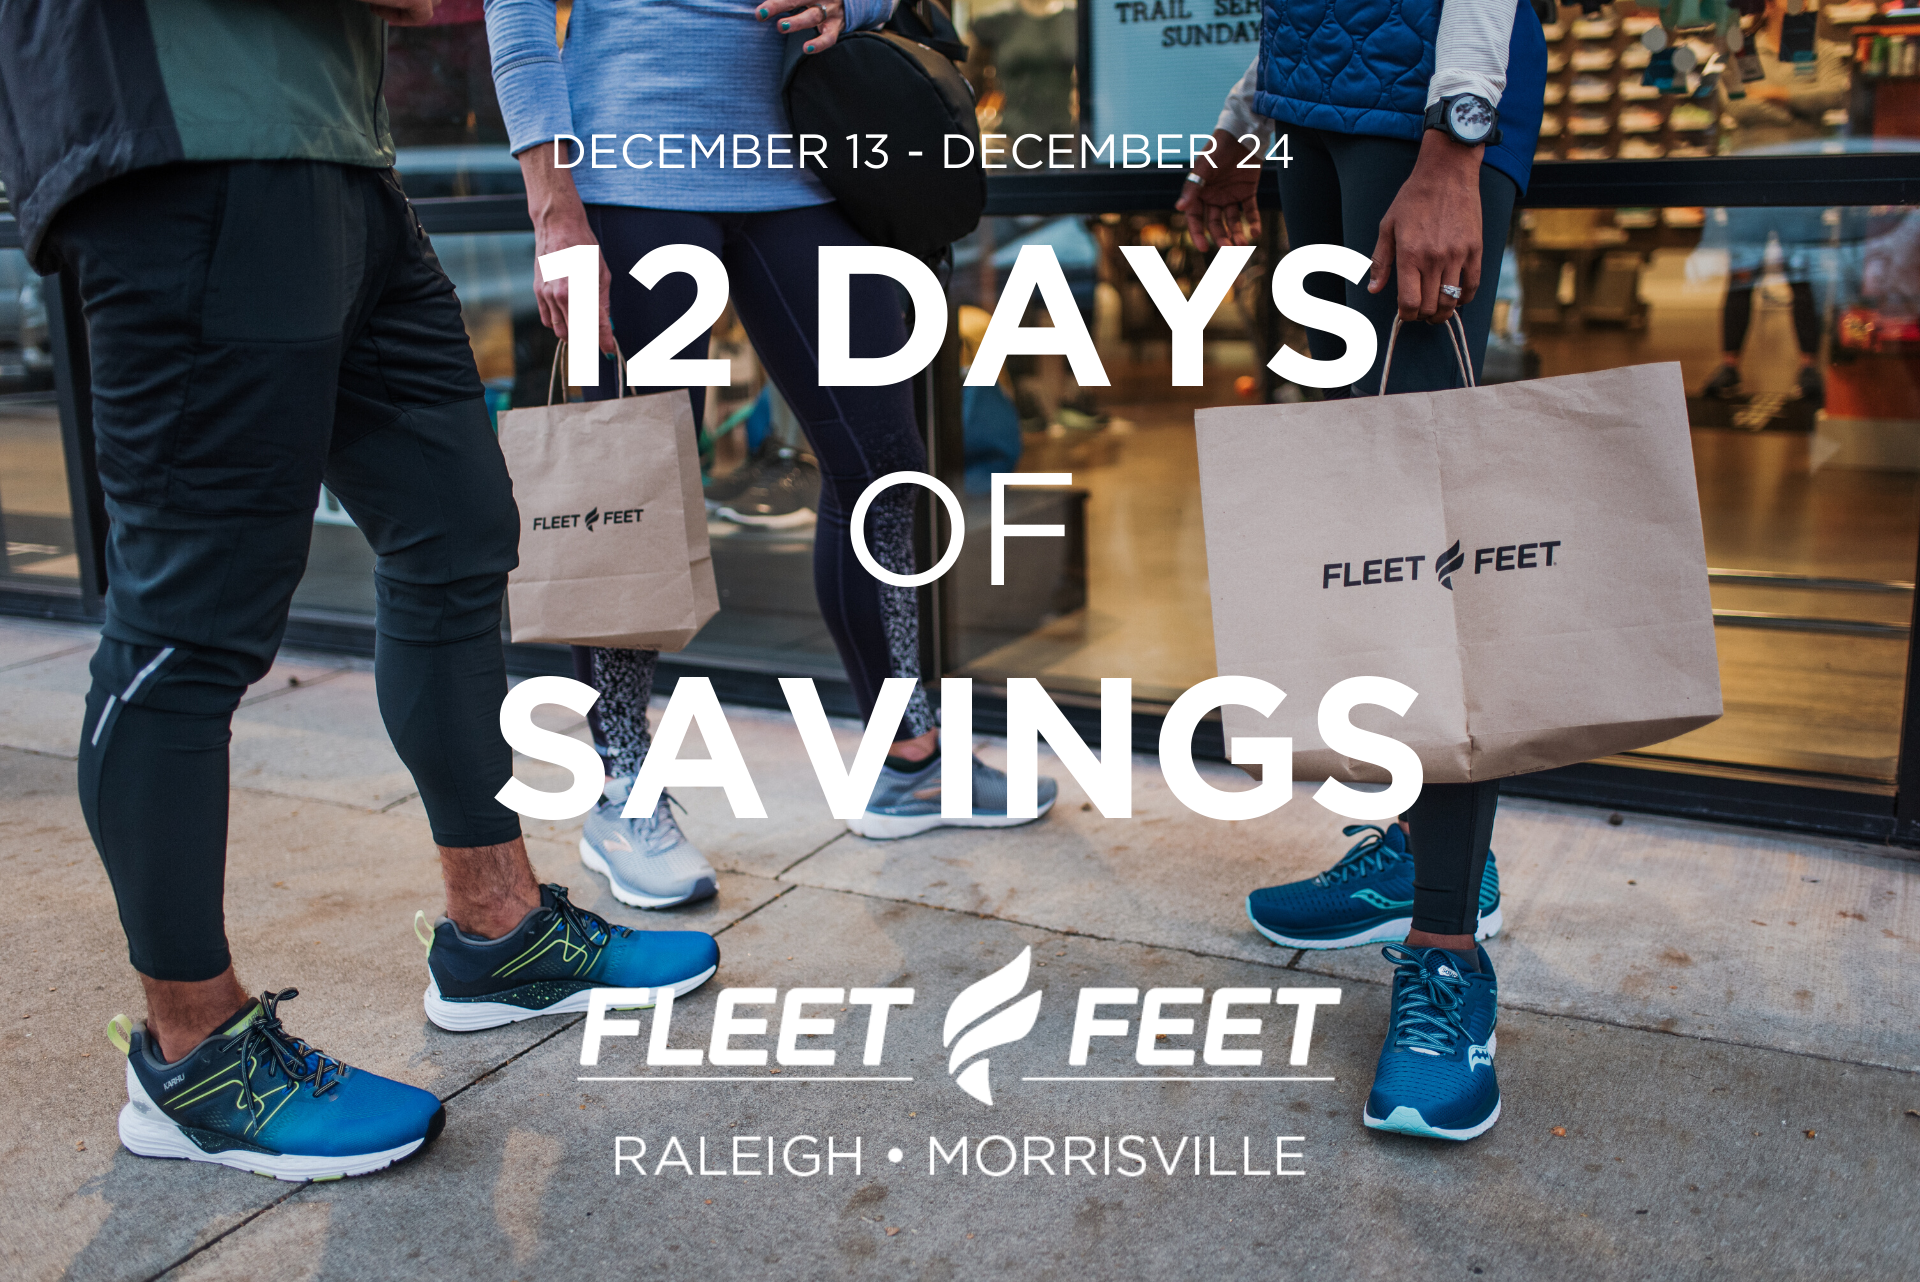 three people holding shopping bags, text says "12 days of savings"